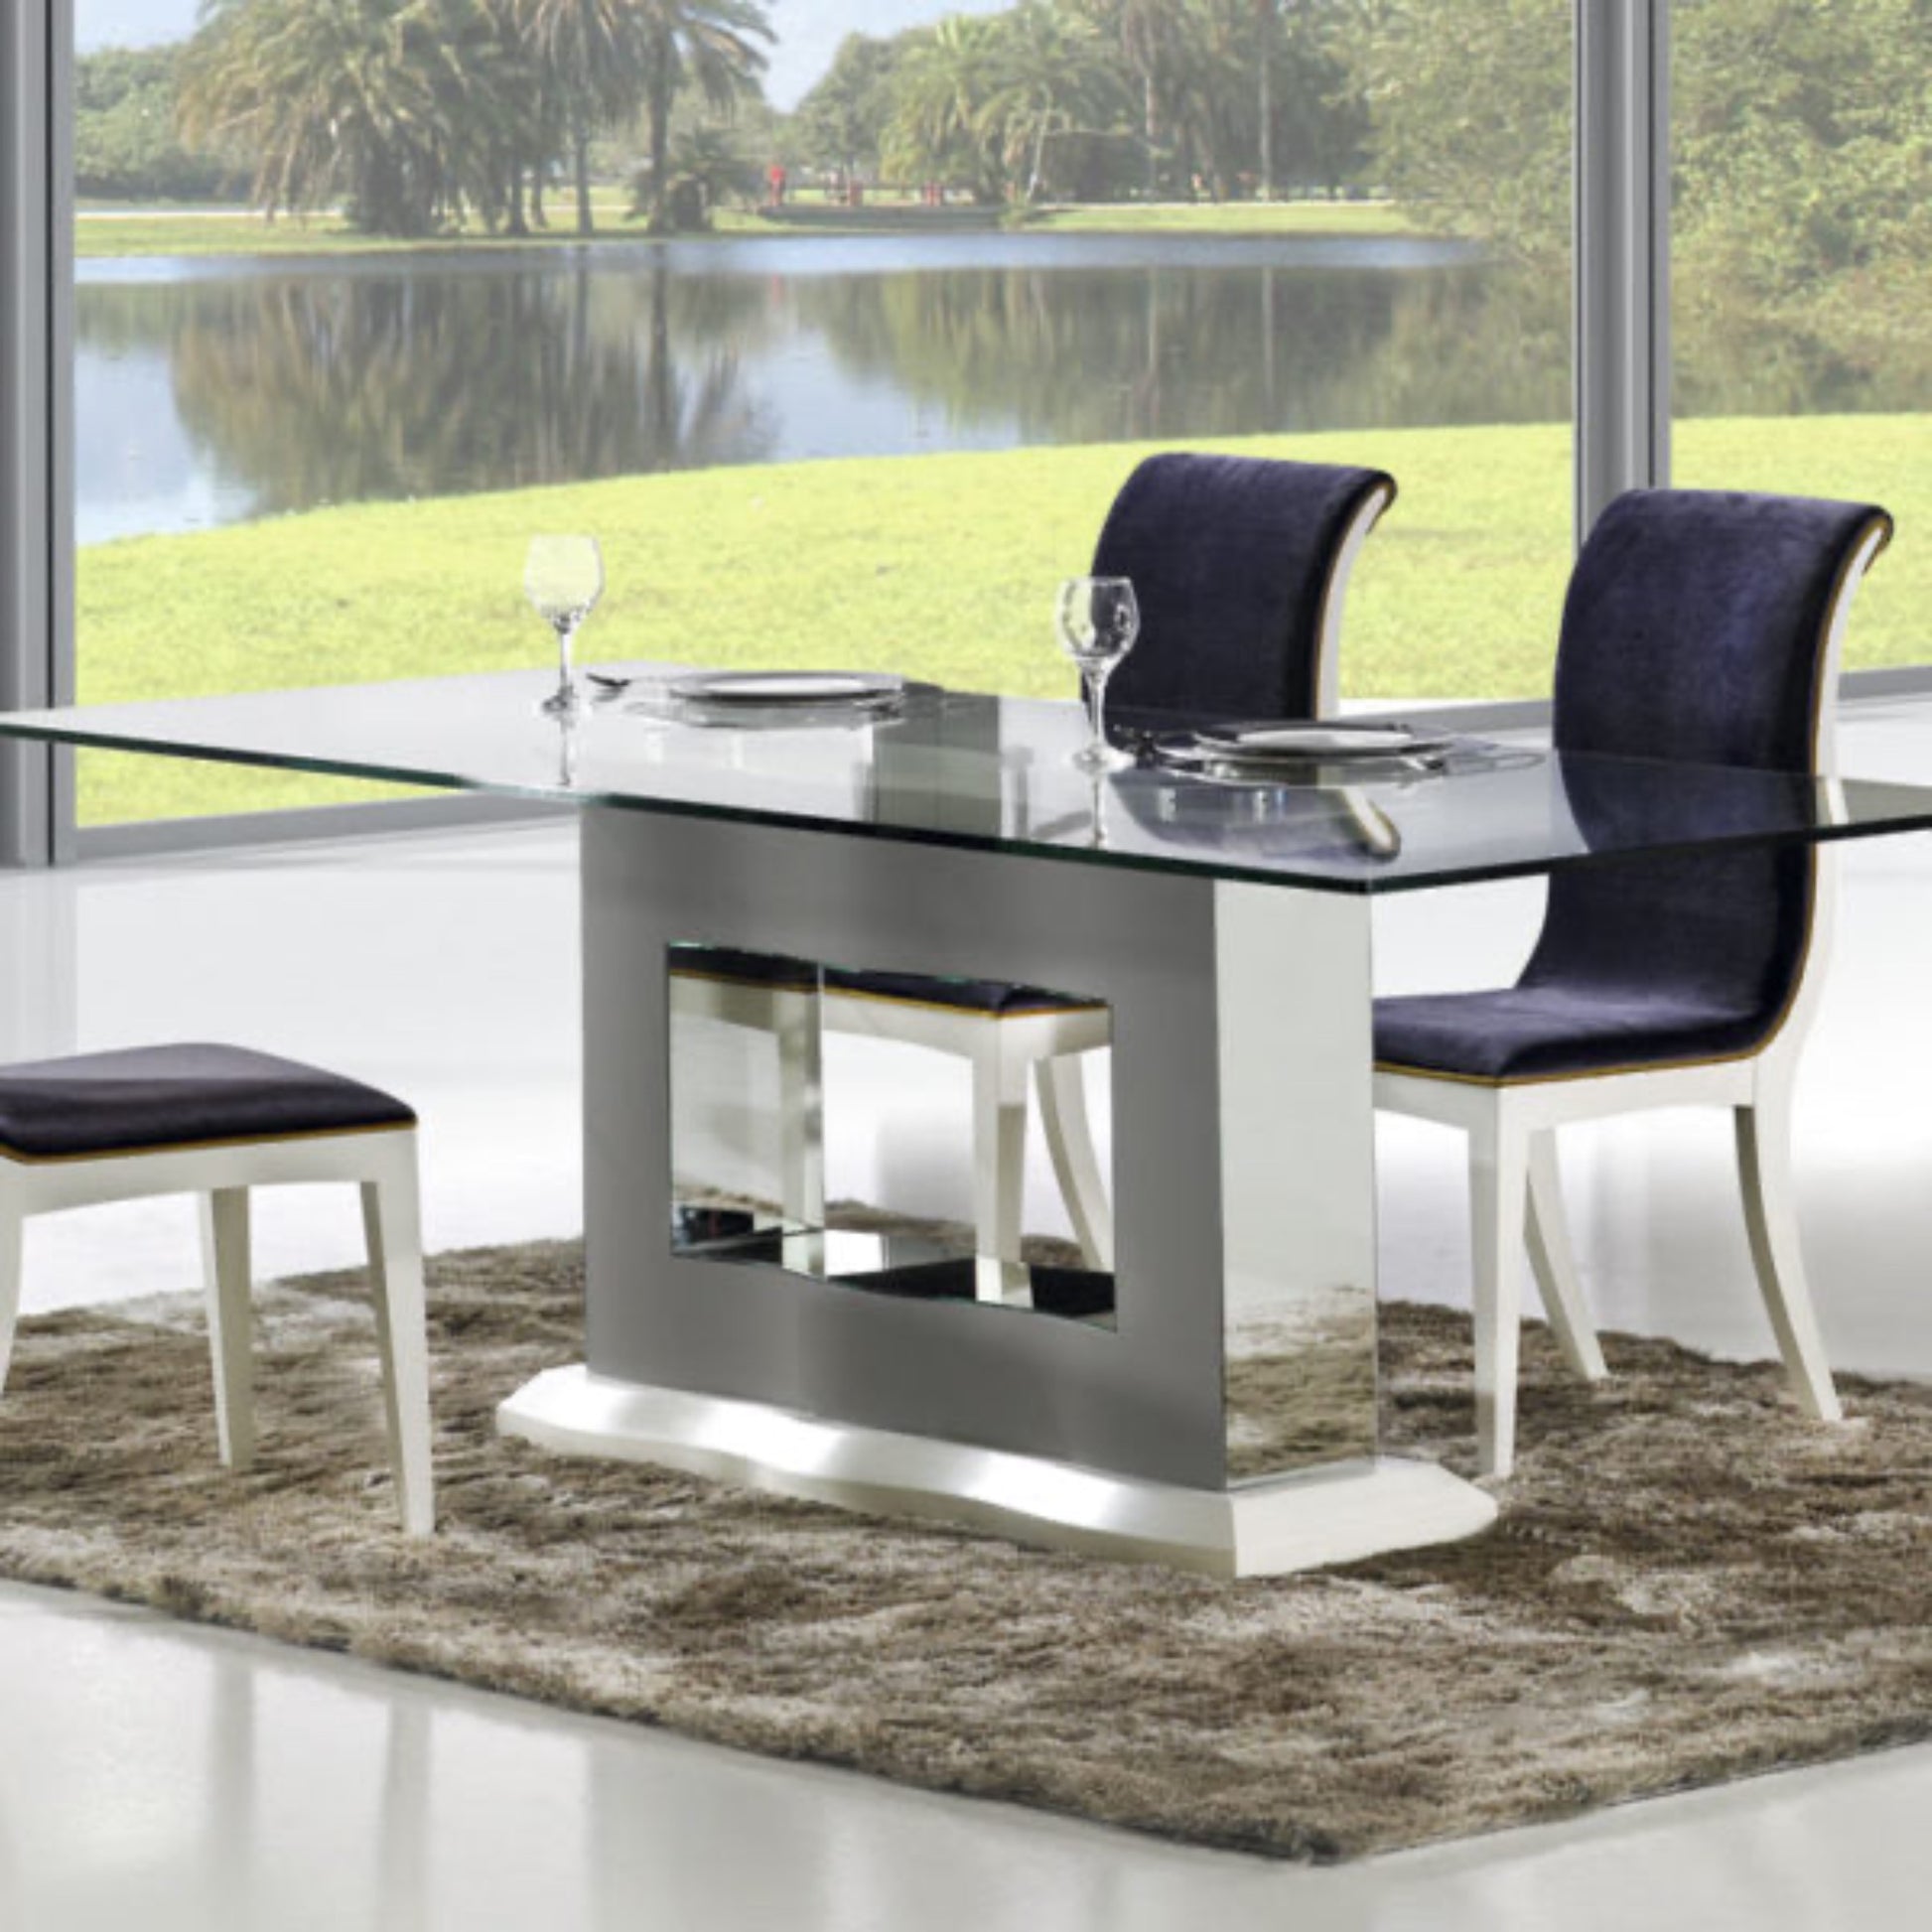 Viena glass dining table with luxury curved Viena dining chairs.